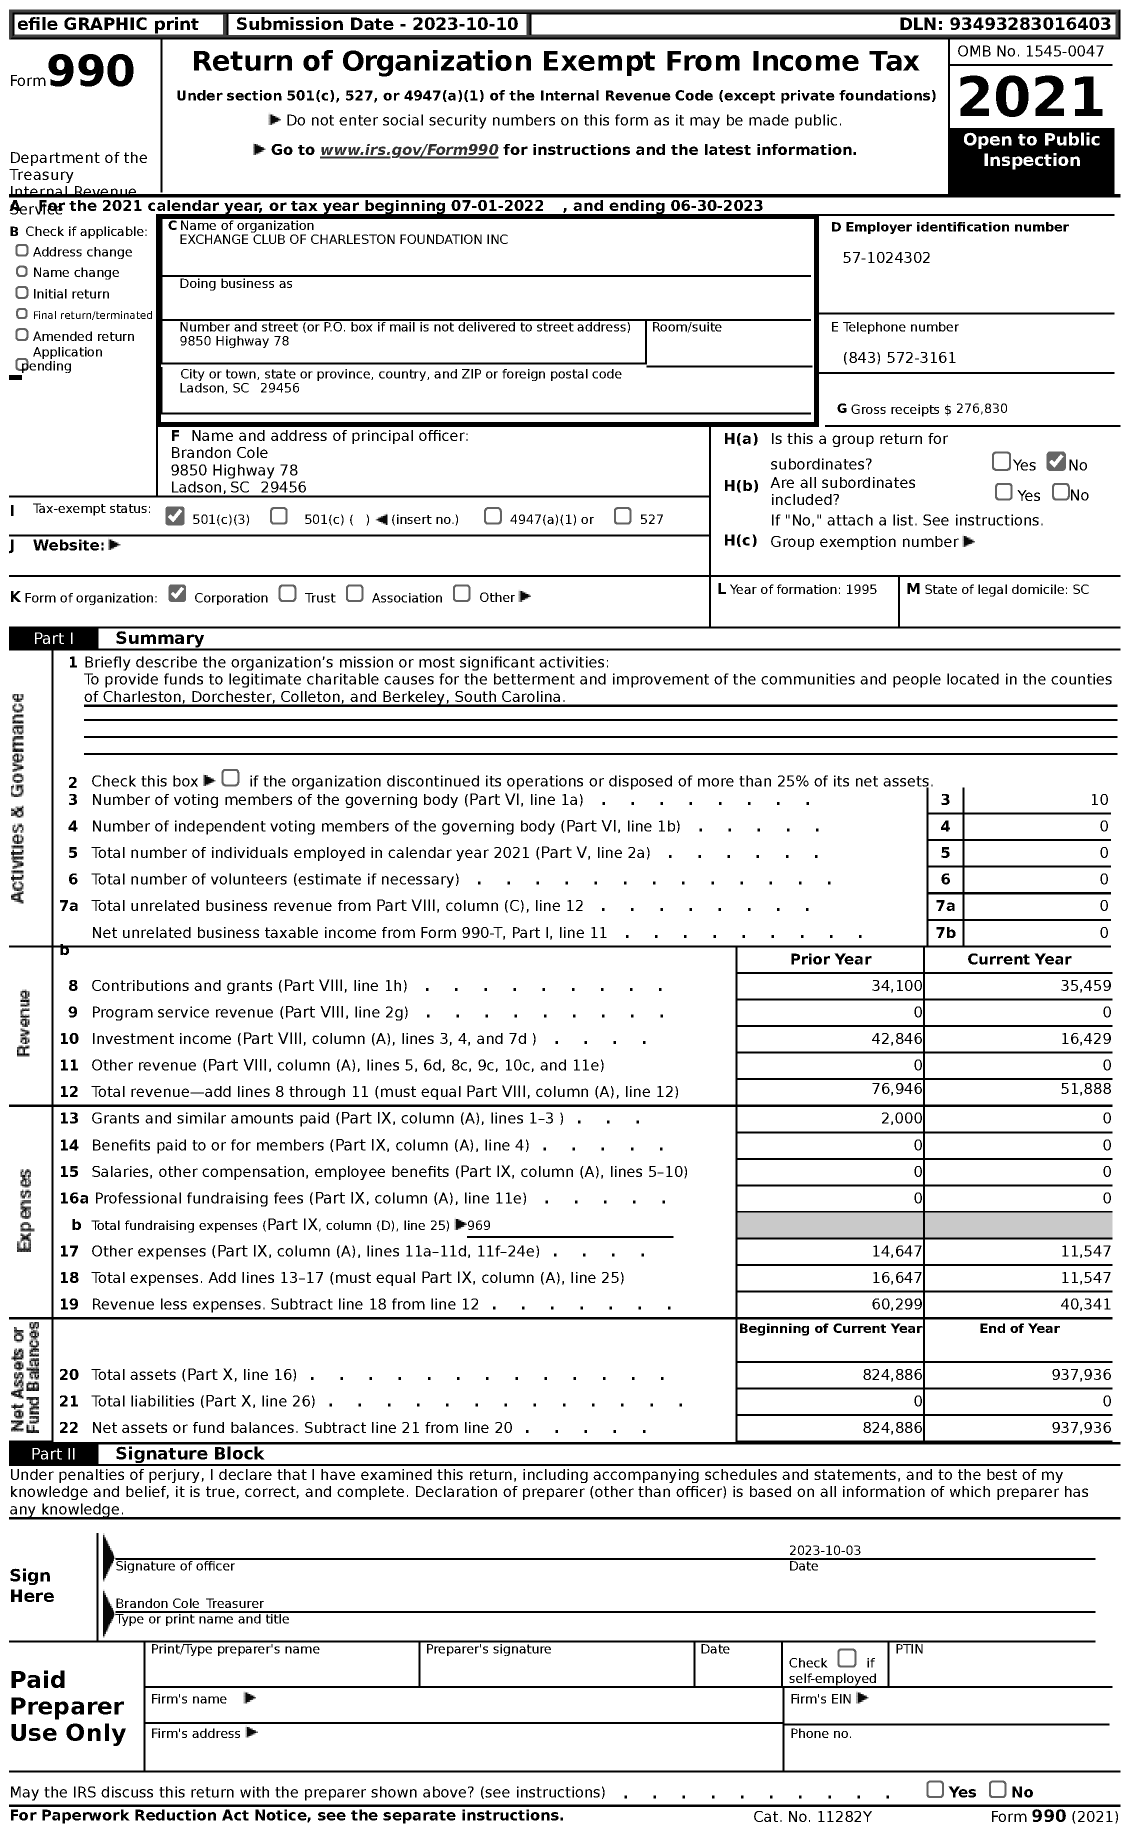 Image of first page of 2022 Form 990 for Exchange Club of Charleston Foundation